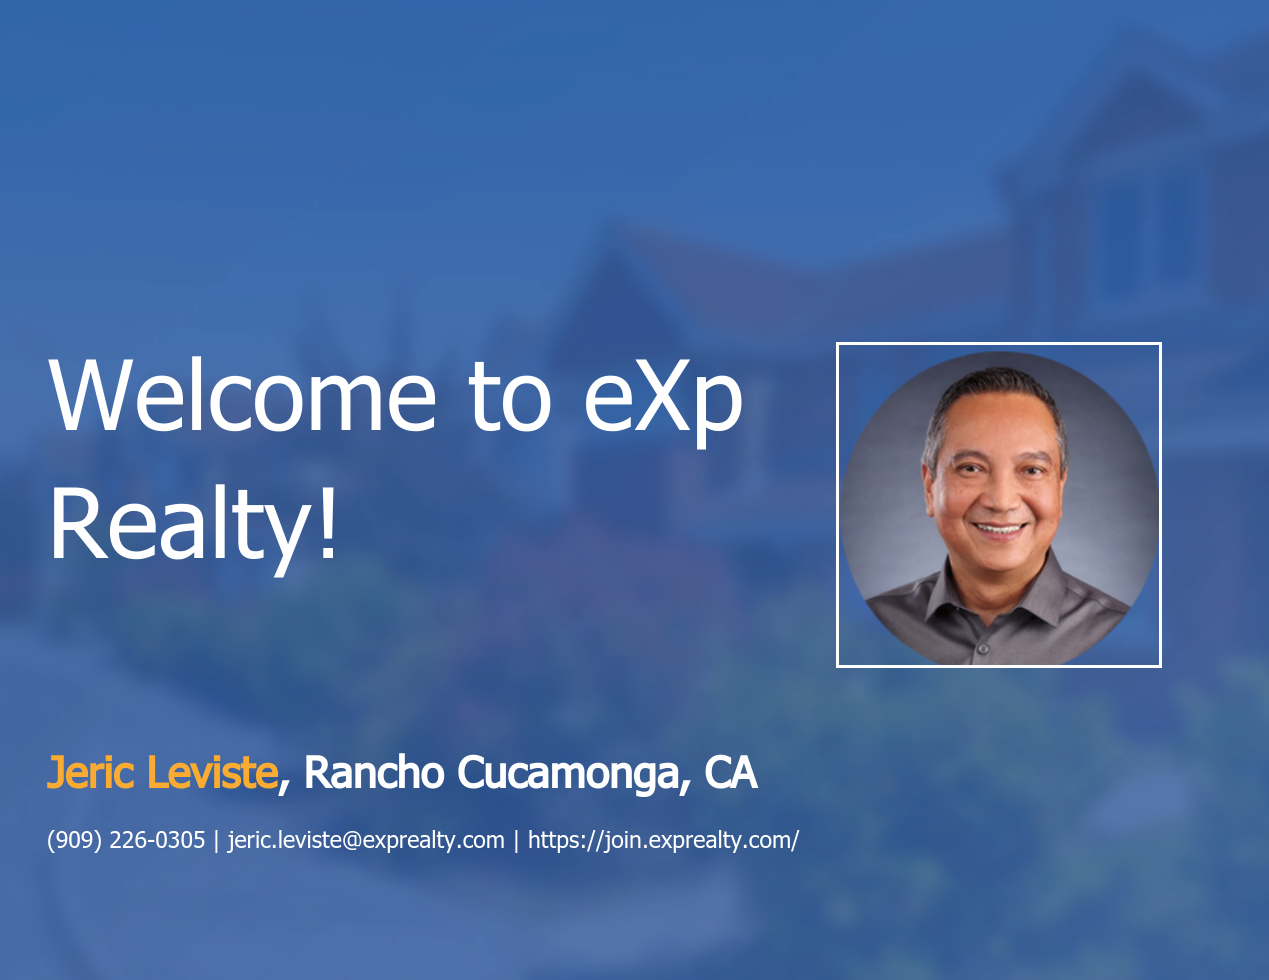 eXp Realty Welcomes Jeric Leviste!